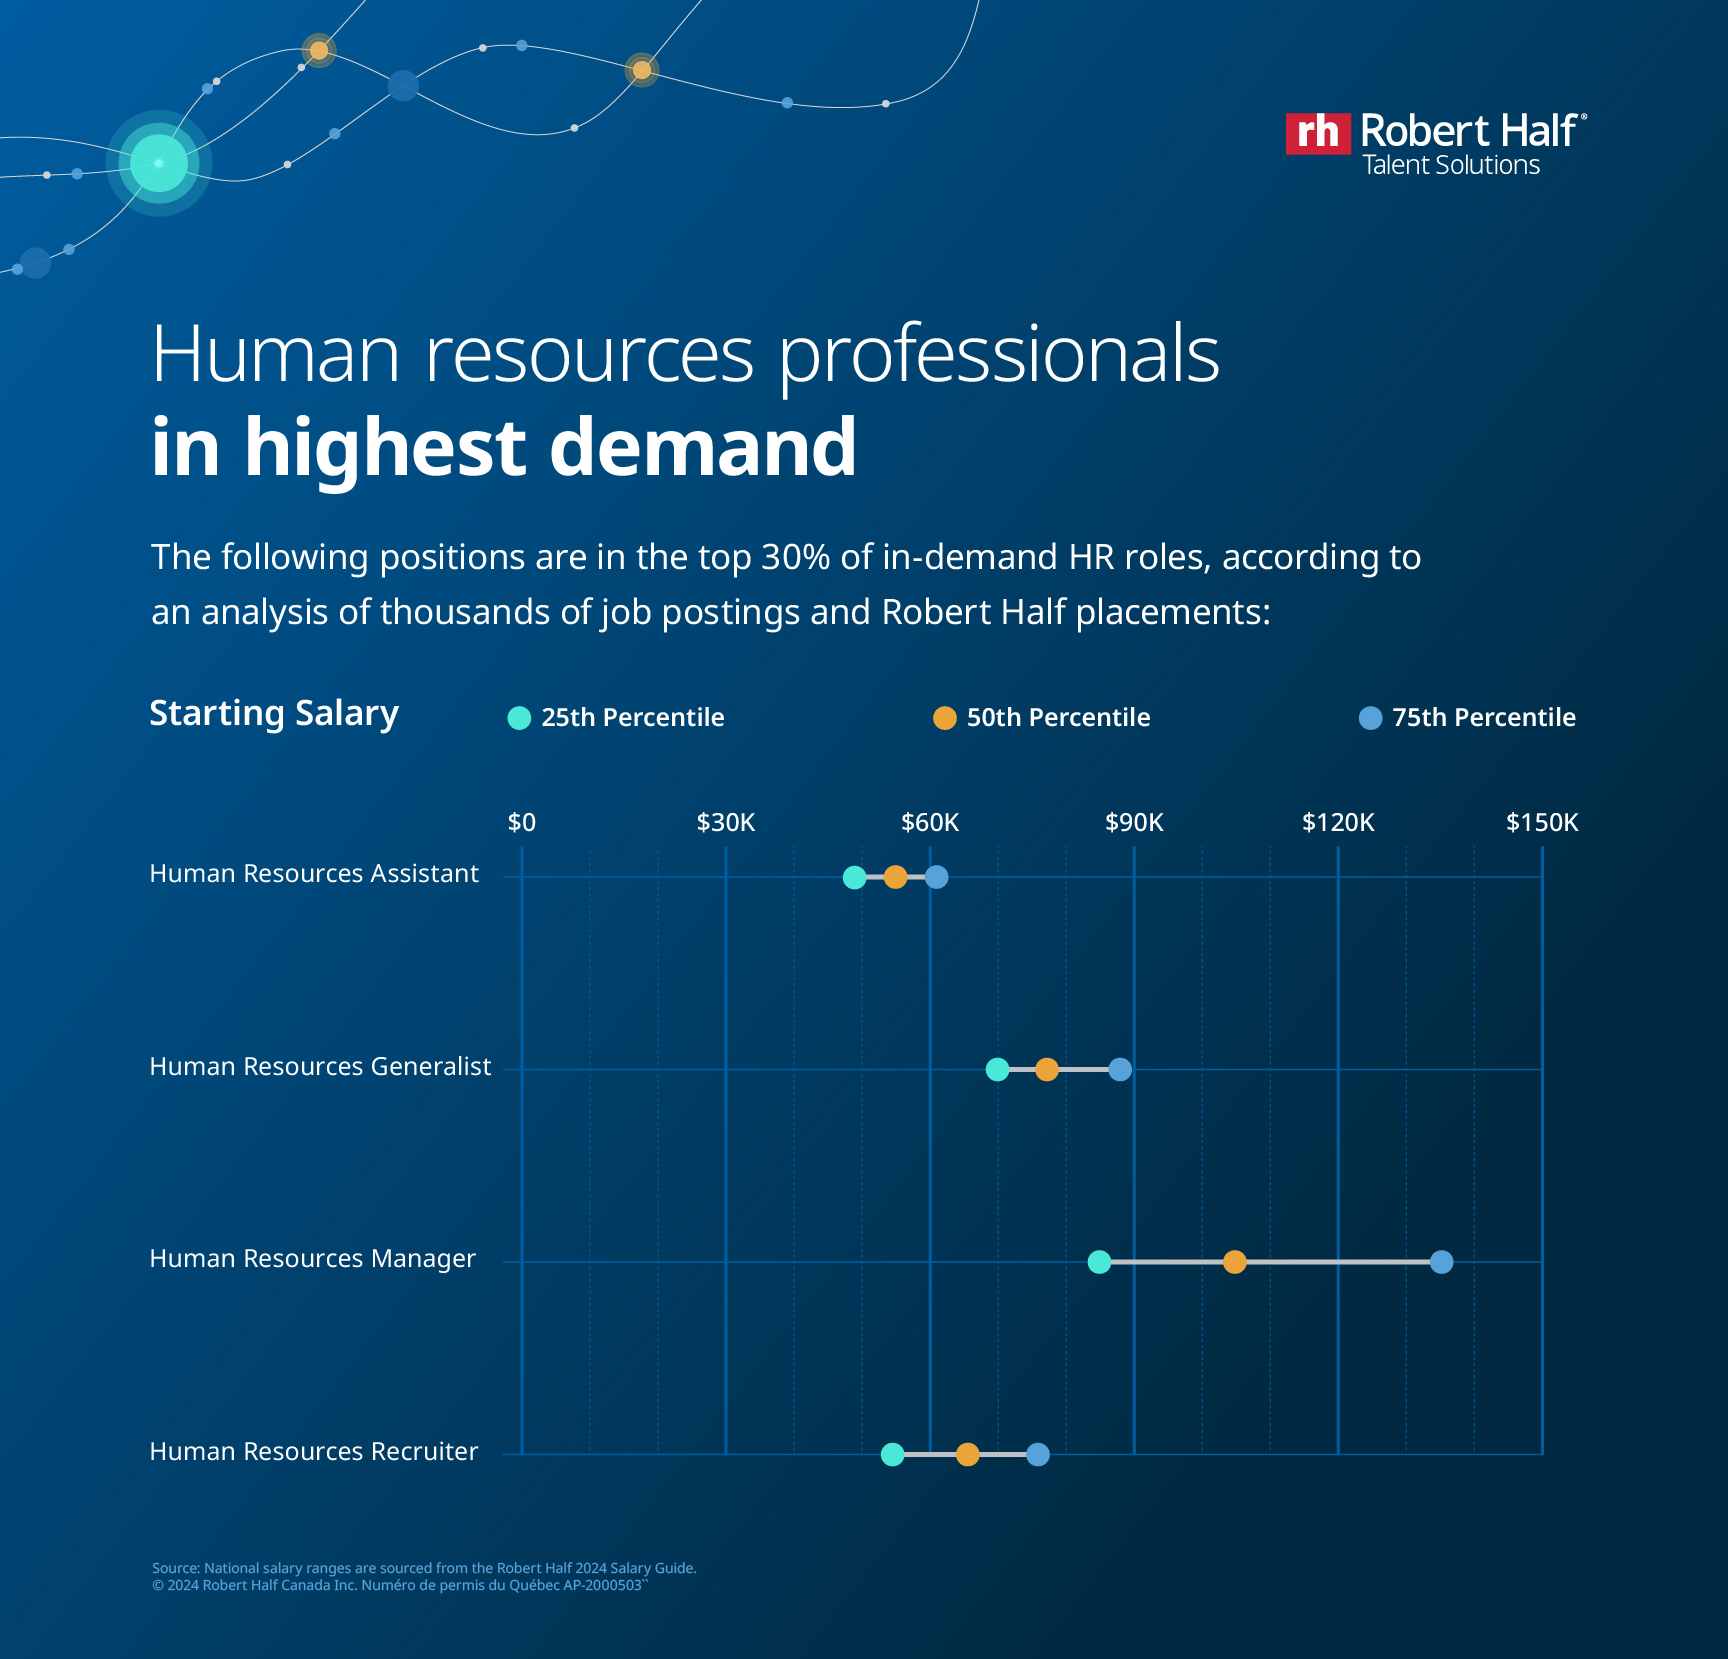 Infographic of human resources roles in highest demand, with starting salary ranges.